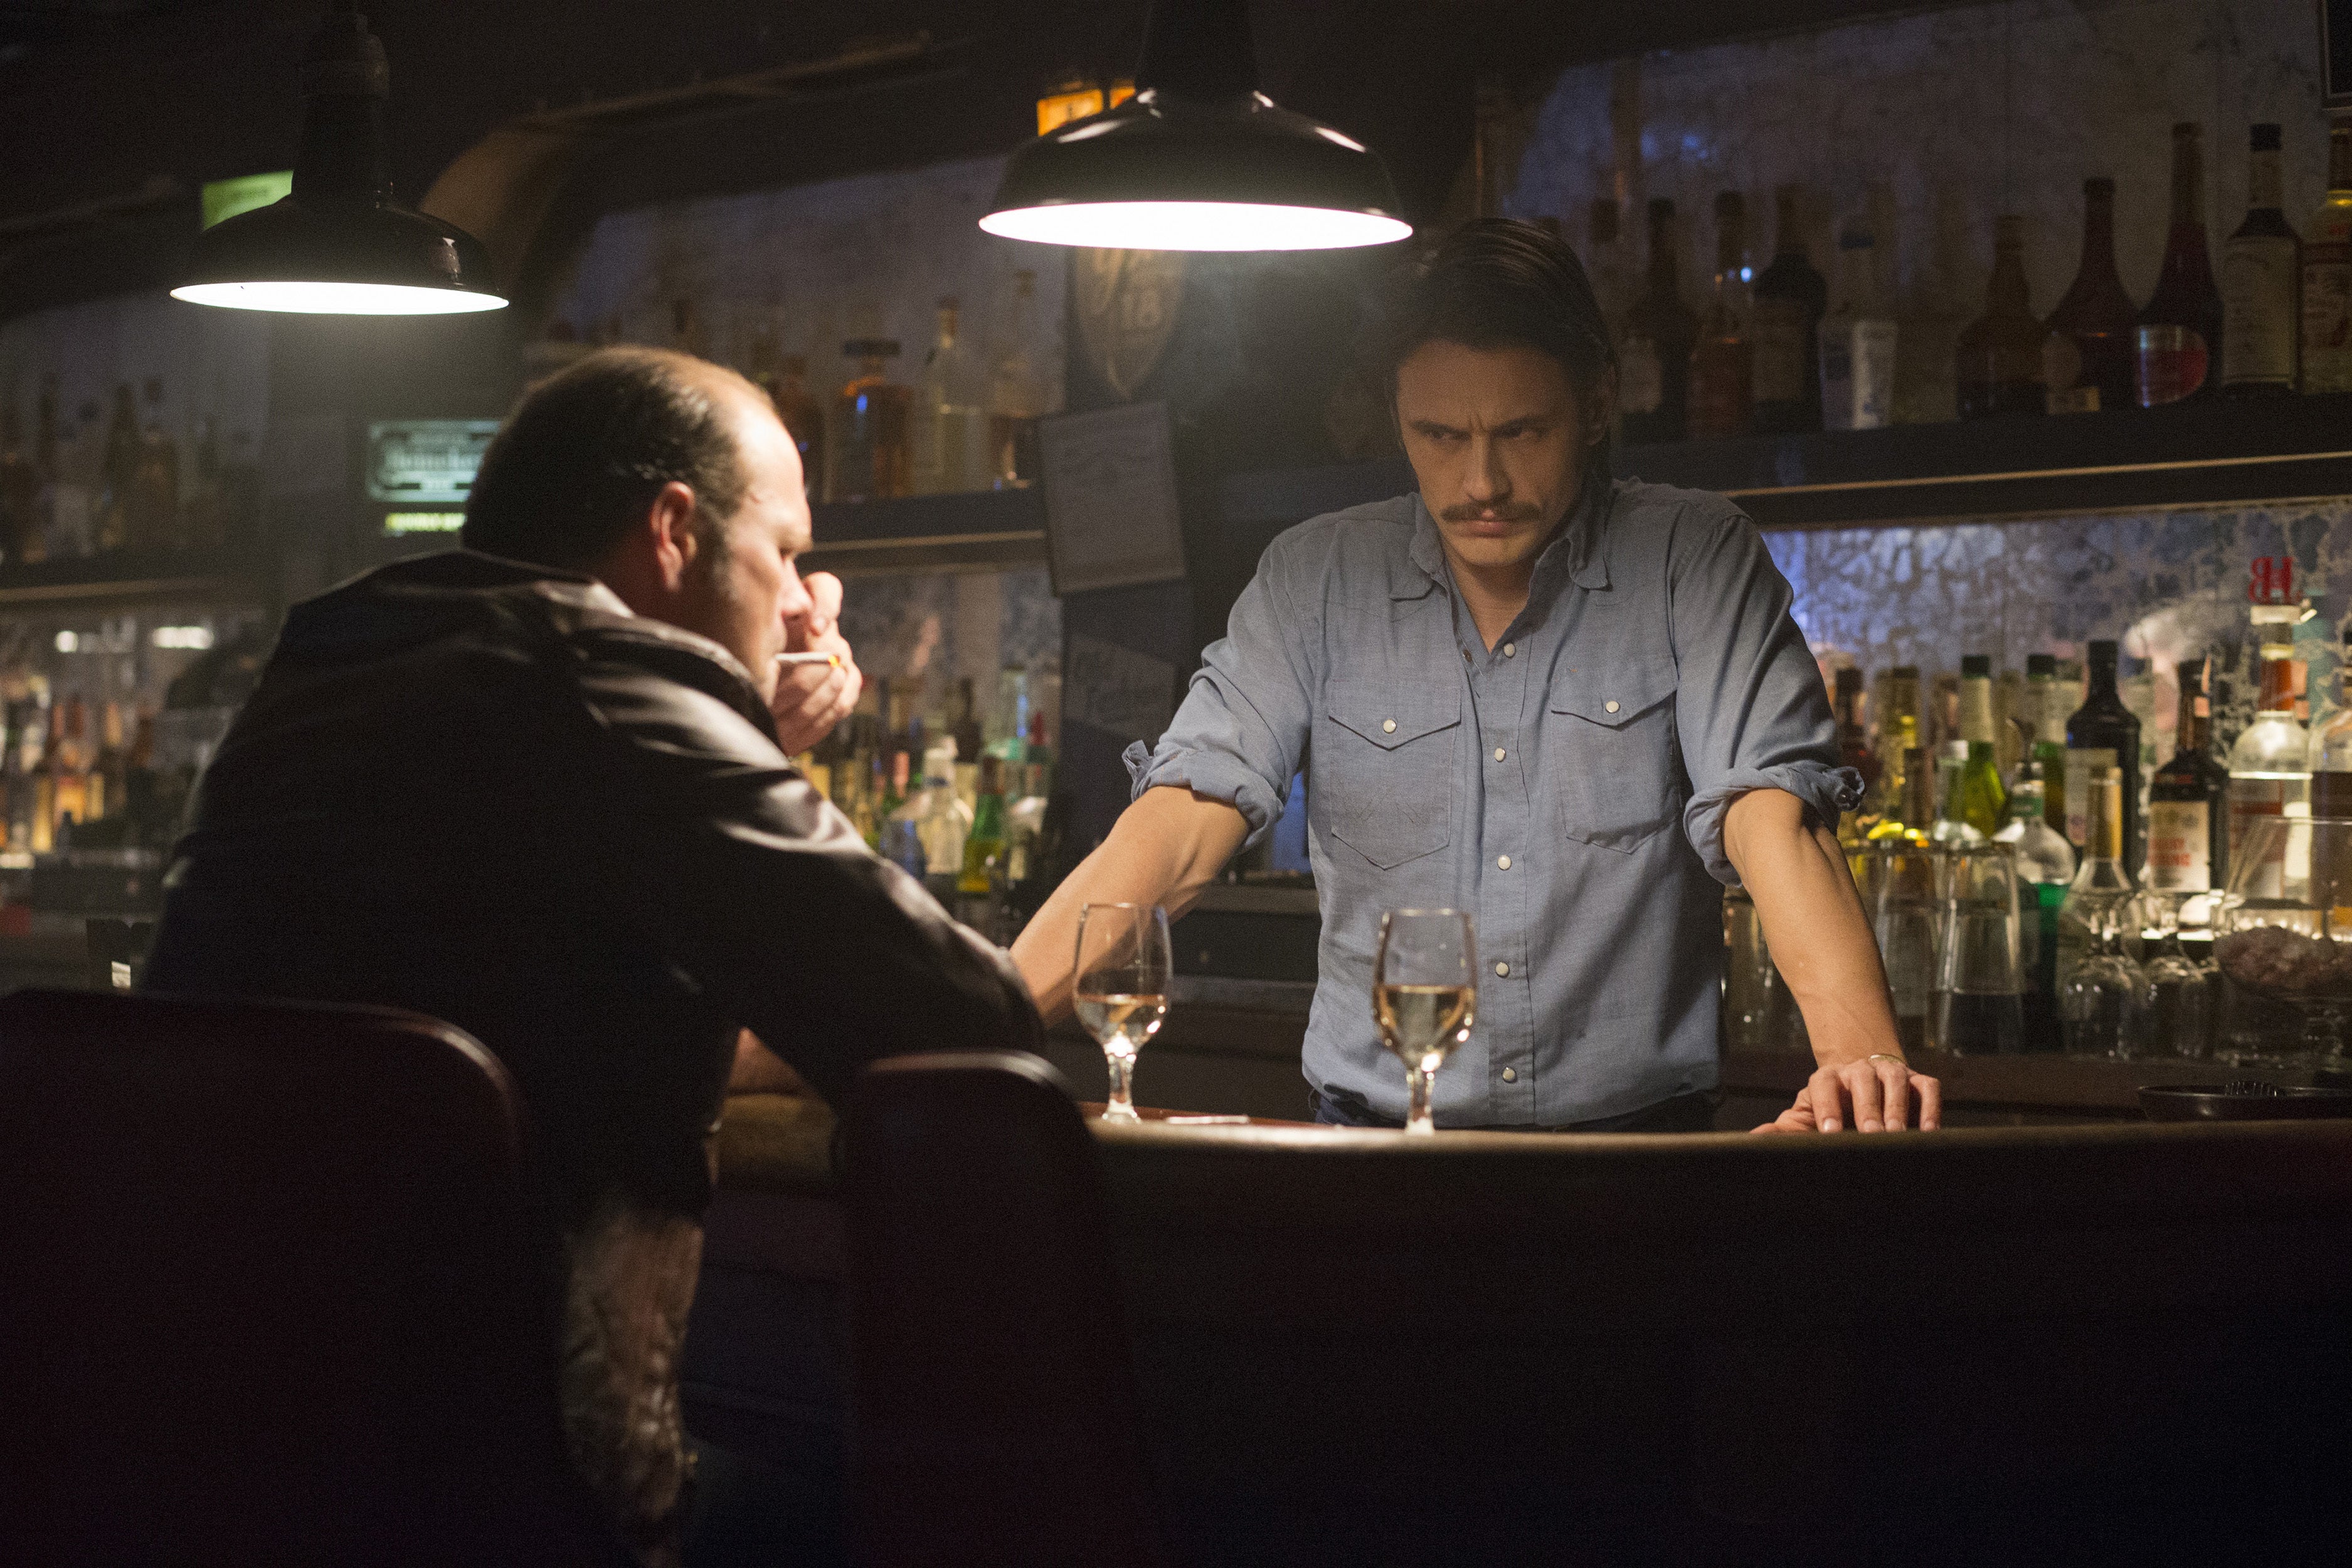 Chris Bauer sits at a bar, while James Franco, with a prominent mustache, stands behind it.